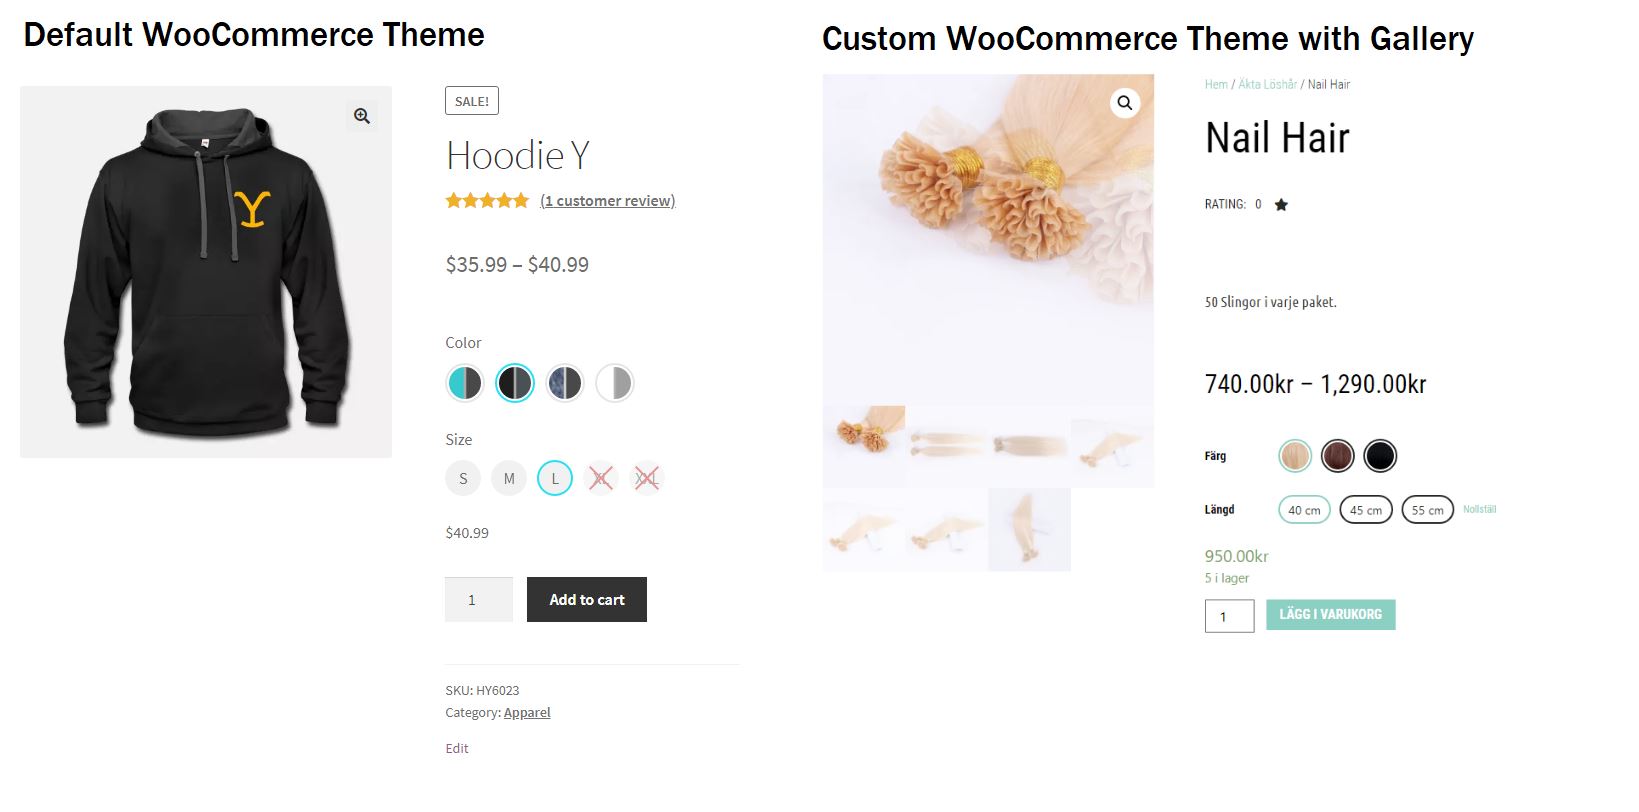 Image Gallery WooCommerce not showing when using Swatches | Super Store ...